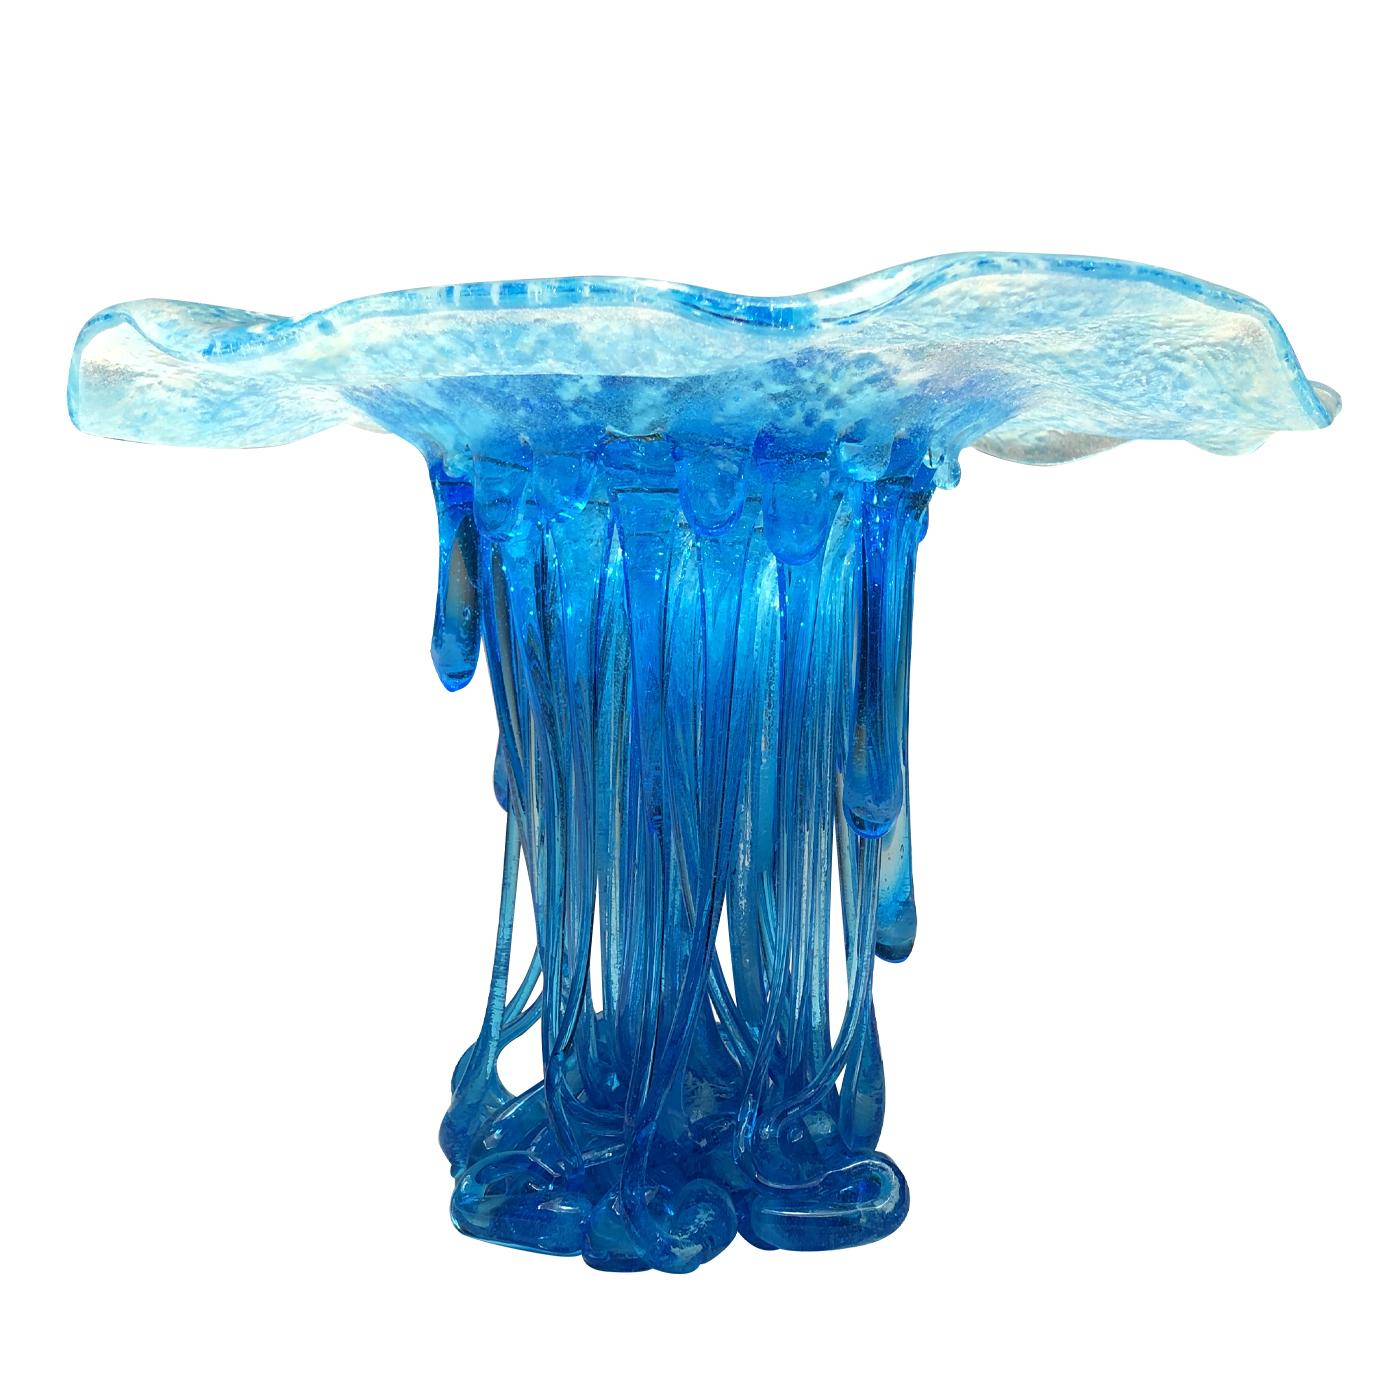 The elegance of the jellyfish is conjured up with this unique Murano glass sculpture in dark and light blues. The flowing, open top of the sculpture and the dripping, coiled section underneath is reminiscent of a flowing jellyfish and its tentacles.